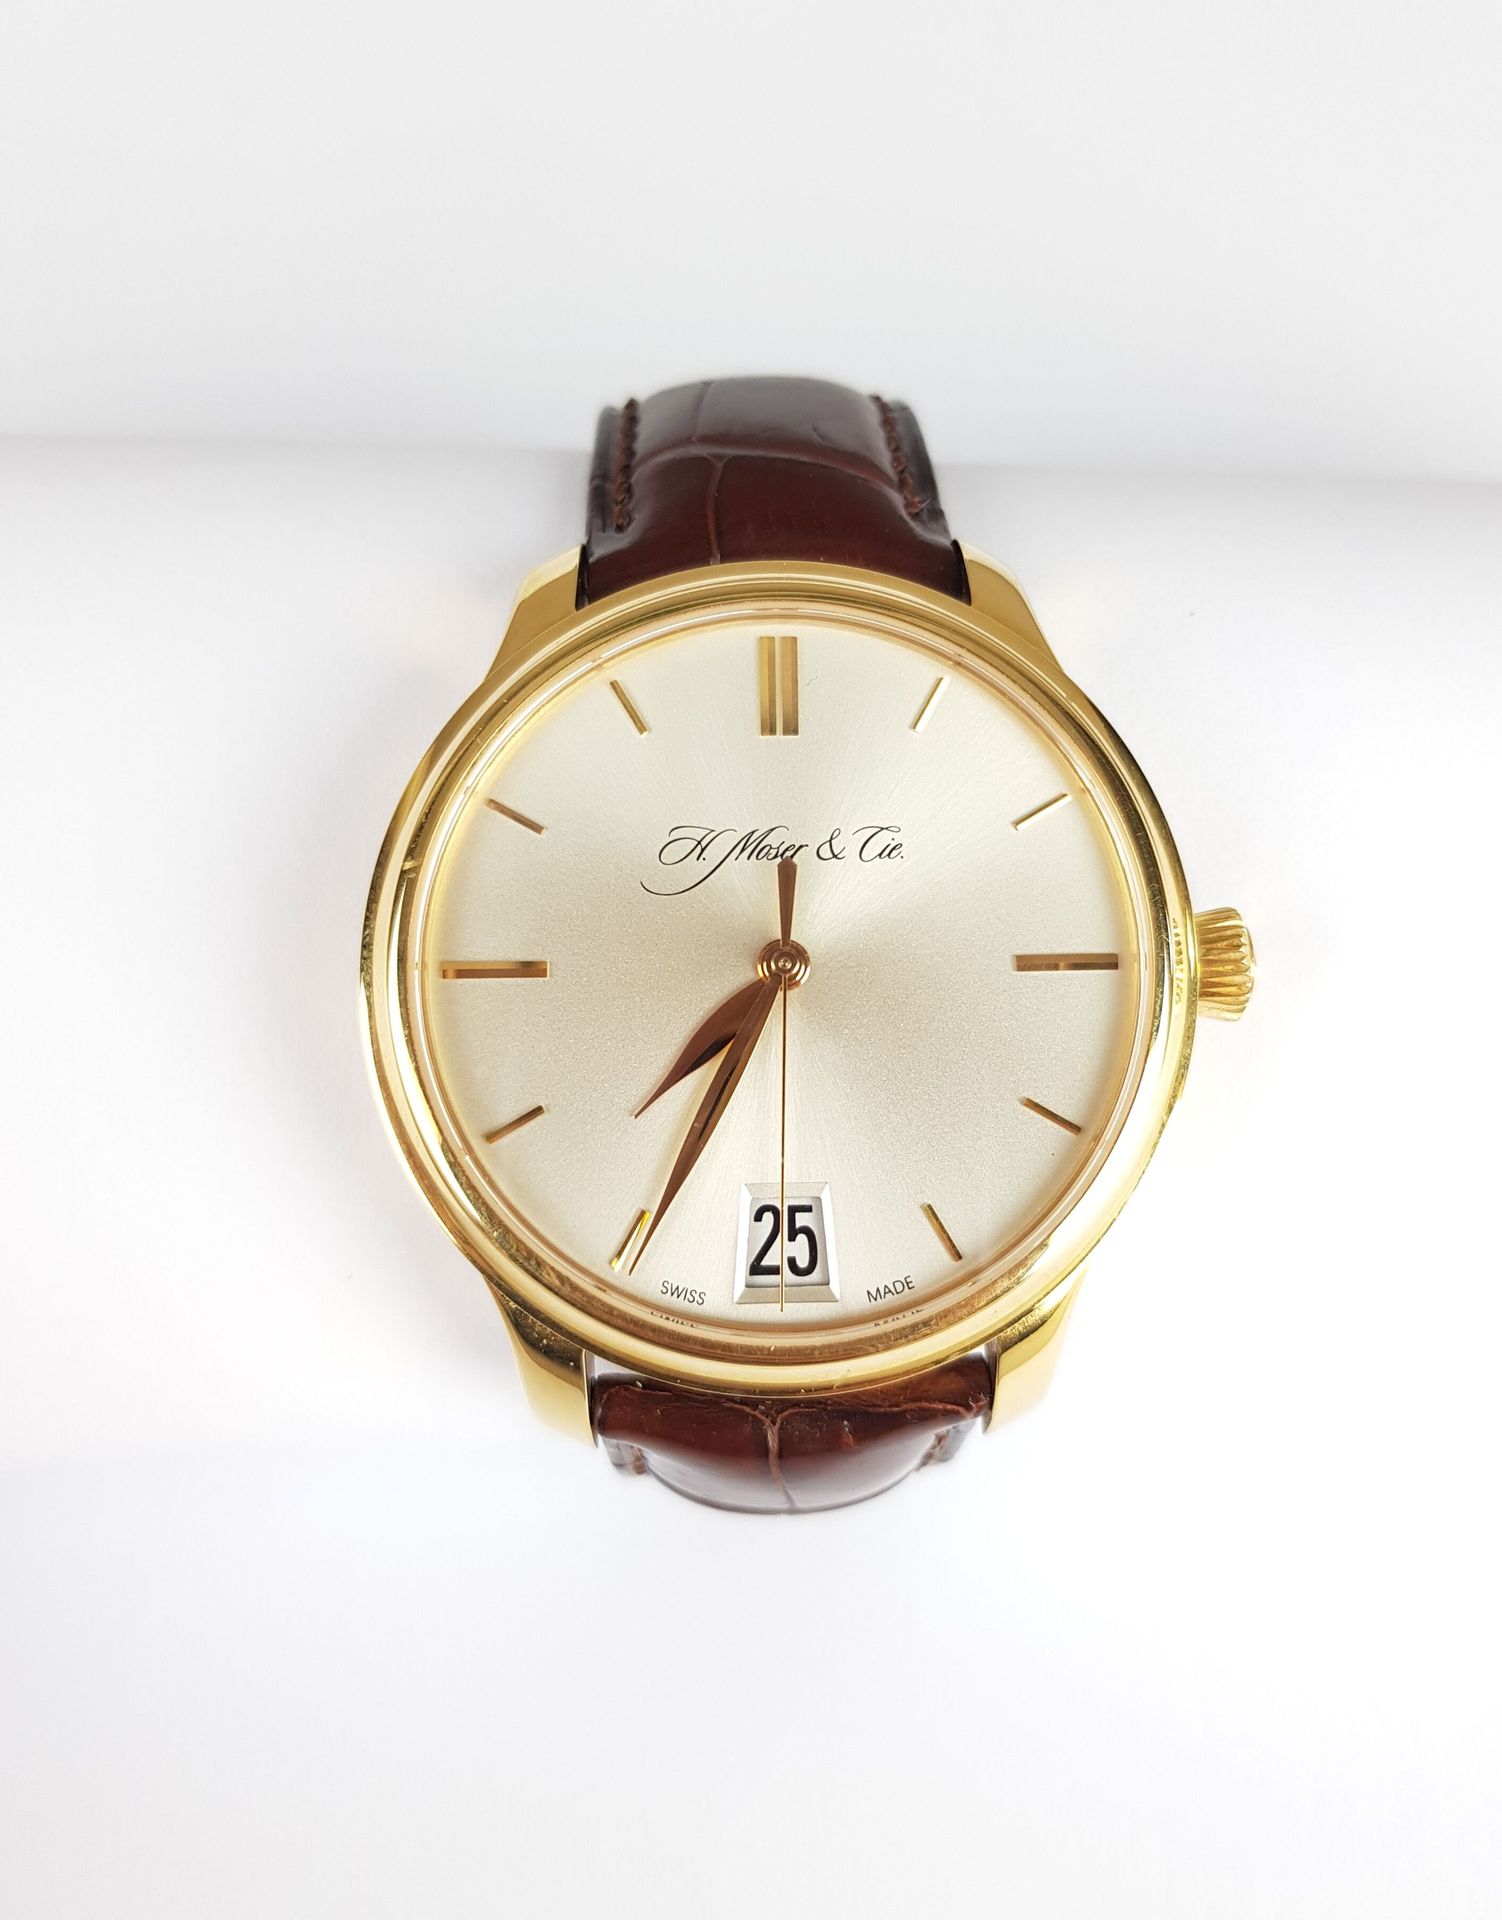 Null Starting price : 4 000 €.

H. MOSER & CIE

Watch in yellow gold 750 thousan&hellip;